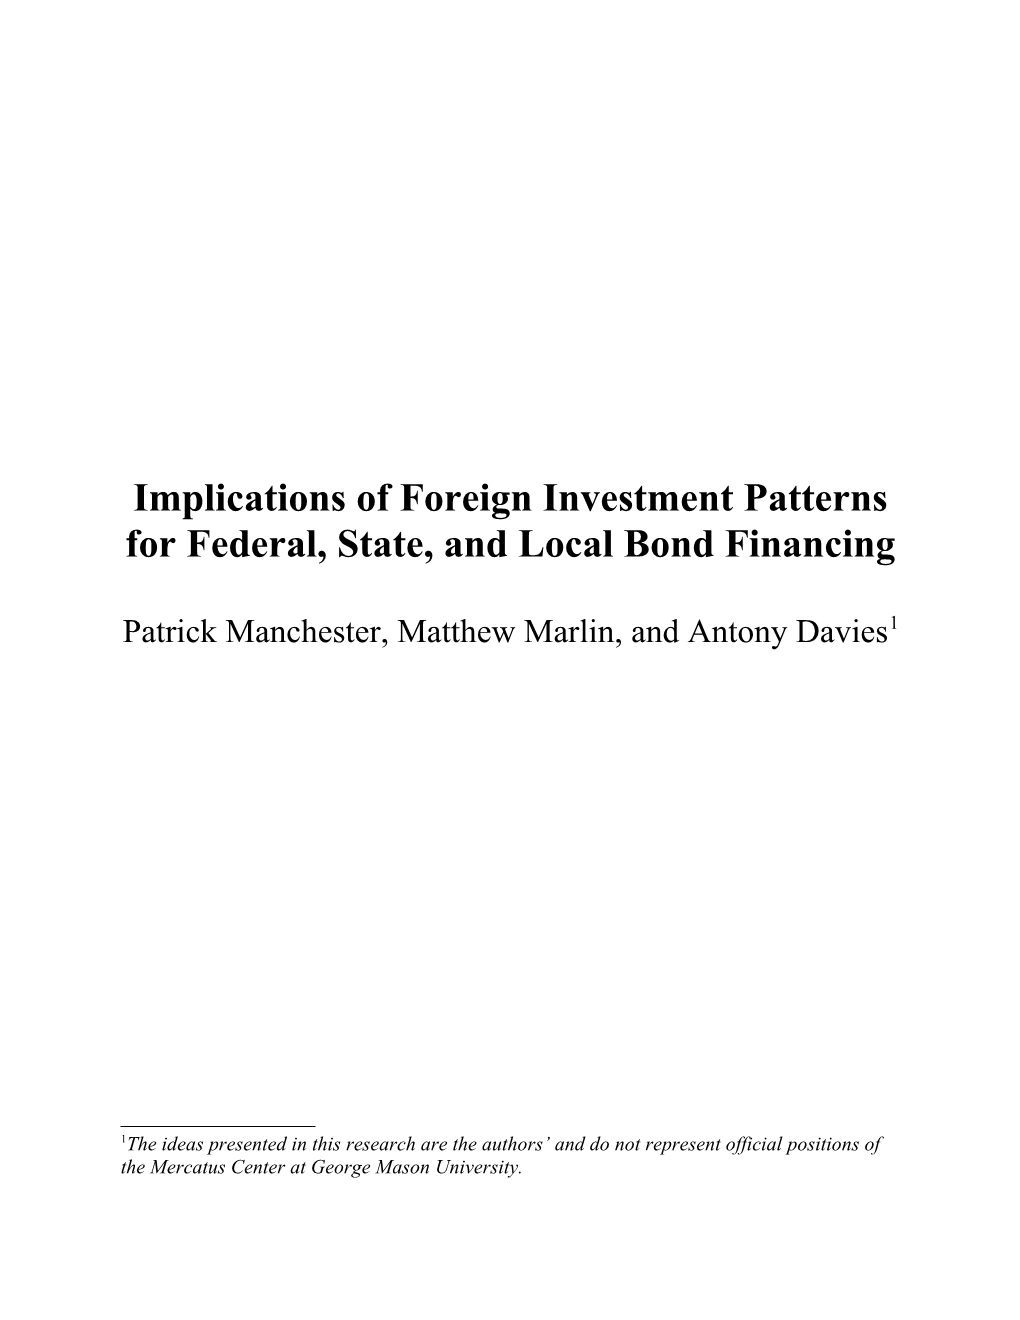 Implications of Foreign Investment Patterns for Federal, State, and Local Bond Financing